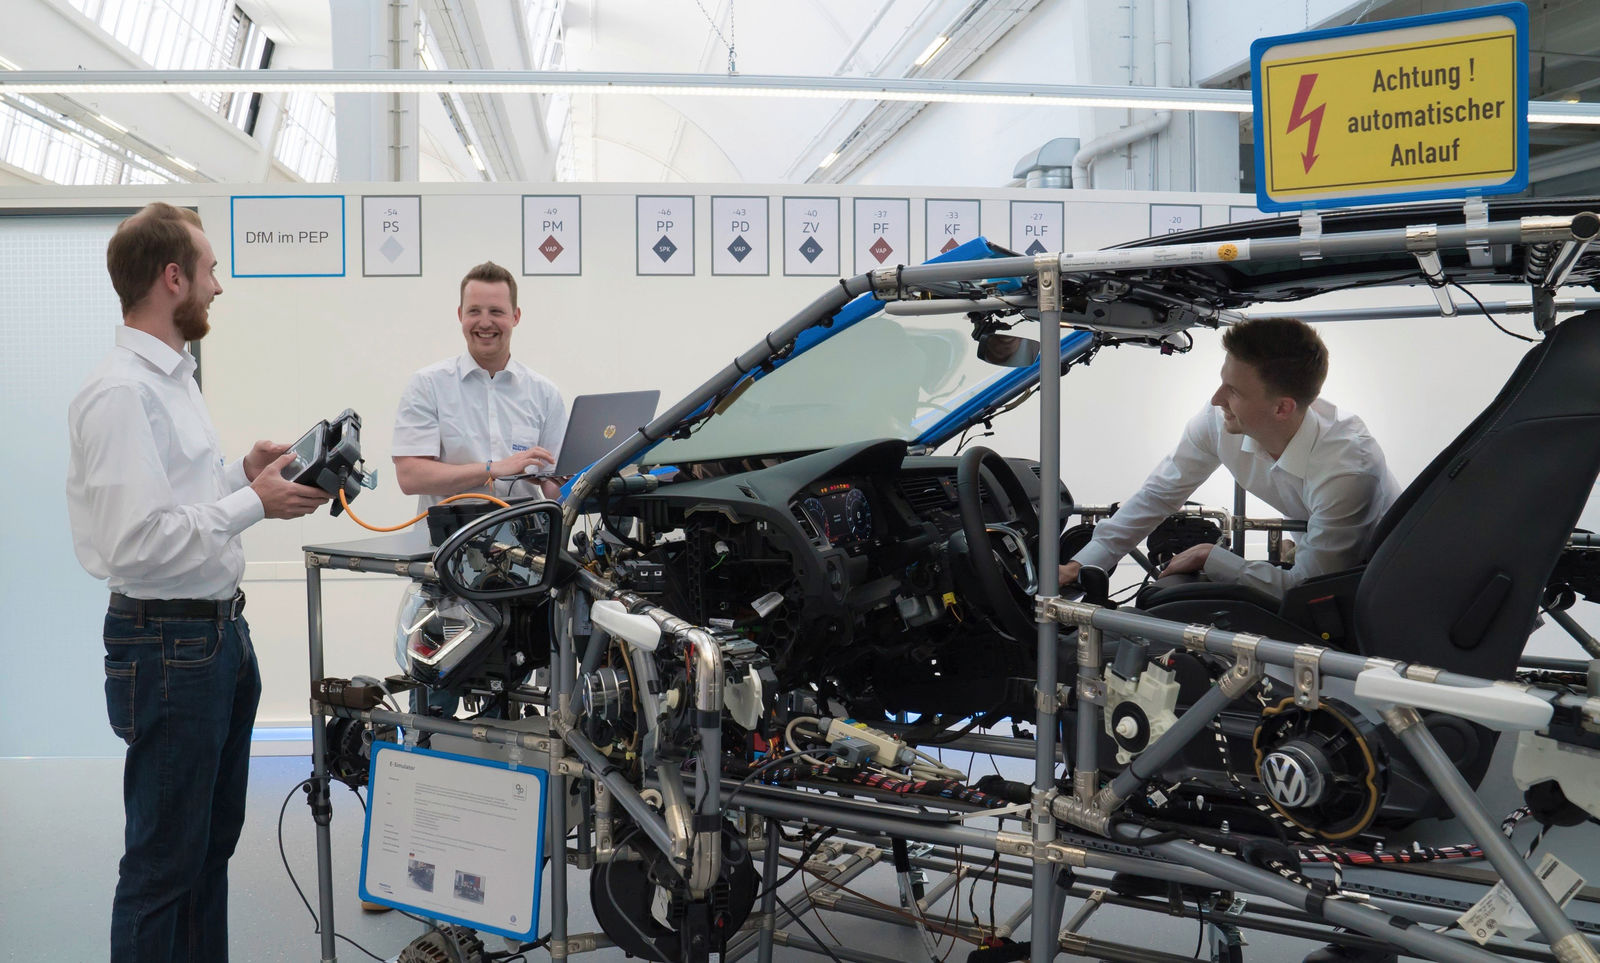 Electric offensive: Volkswagen trains top experts for the production of the ID. family